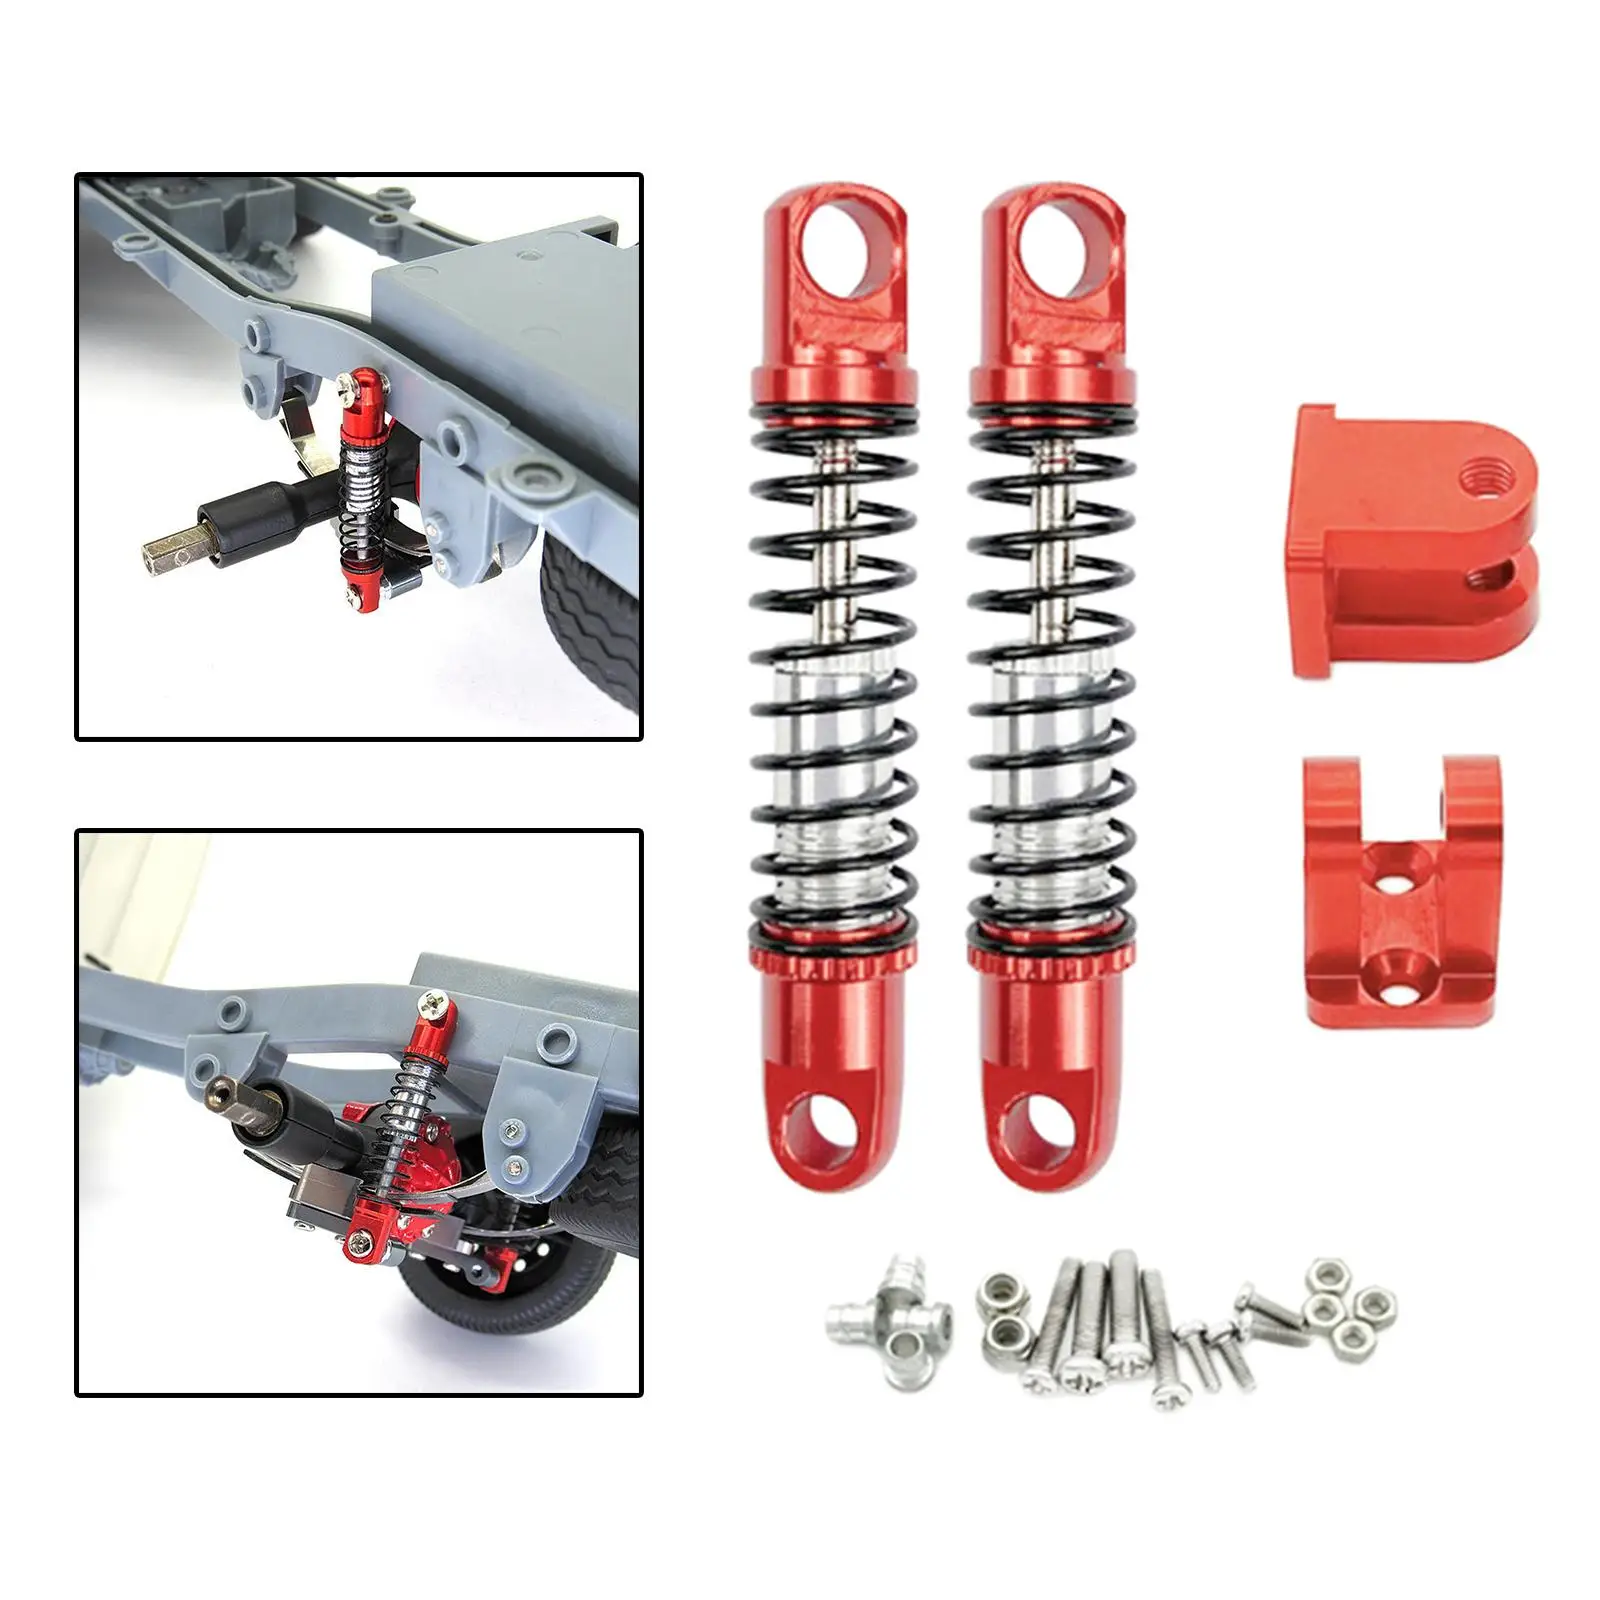 2pcs Front Shock Absorber Damper Spring with Fixed Seat for WPL D12 RC Car